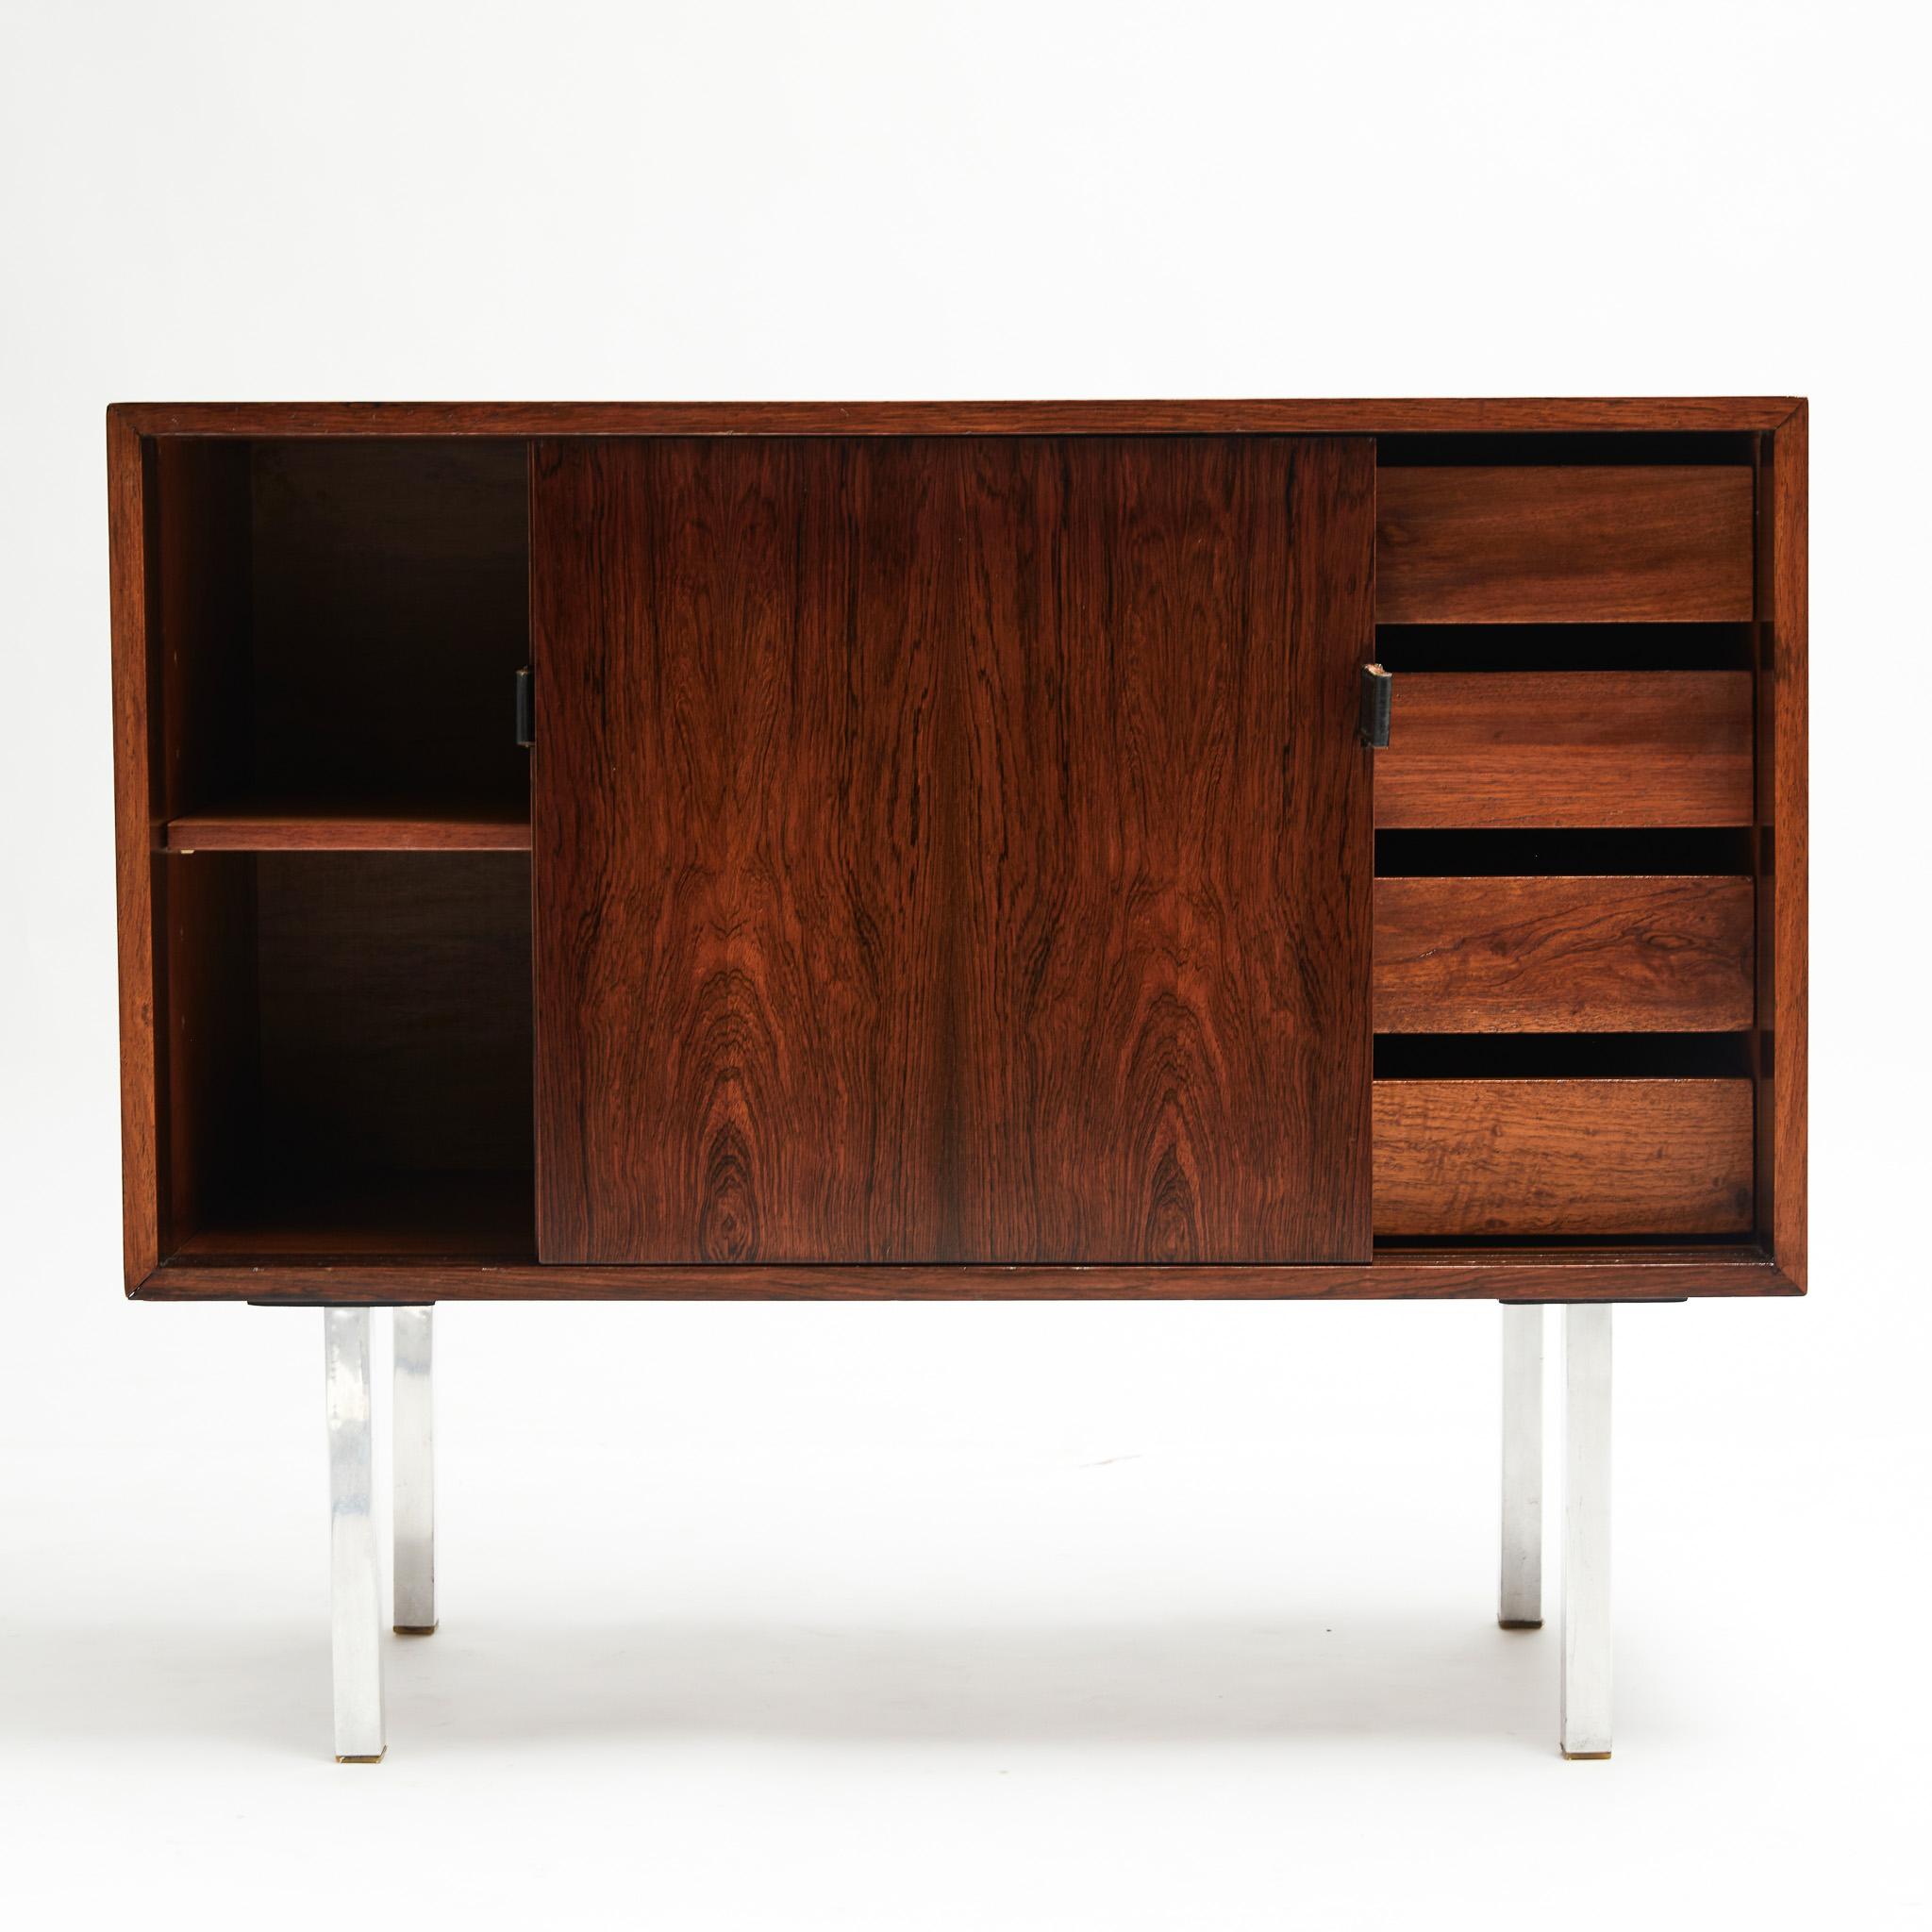 Mid-Century Modern Midcentury Chest in Hardwood & Chrome by Forma Moveis, 1965 Brazil, Sealed For Sale